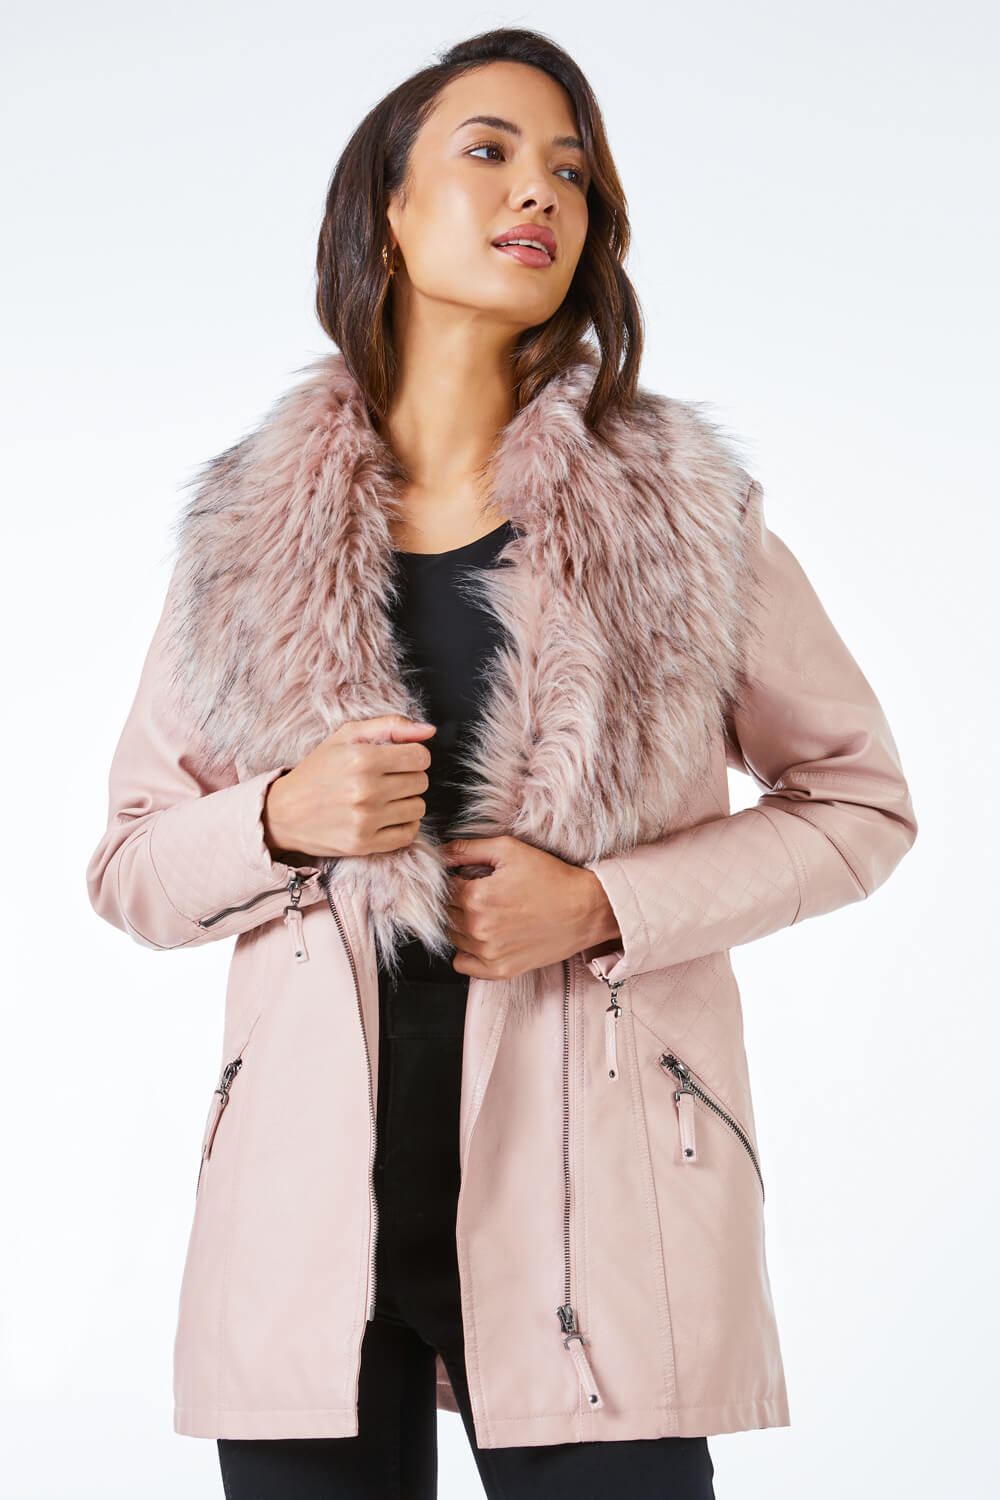 PINK Longline Faux Leather Belted Coat, Image 2 of 5